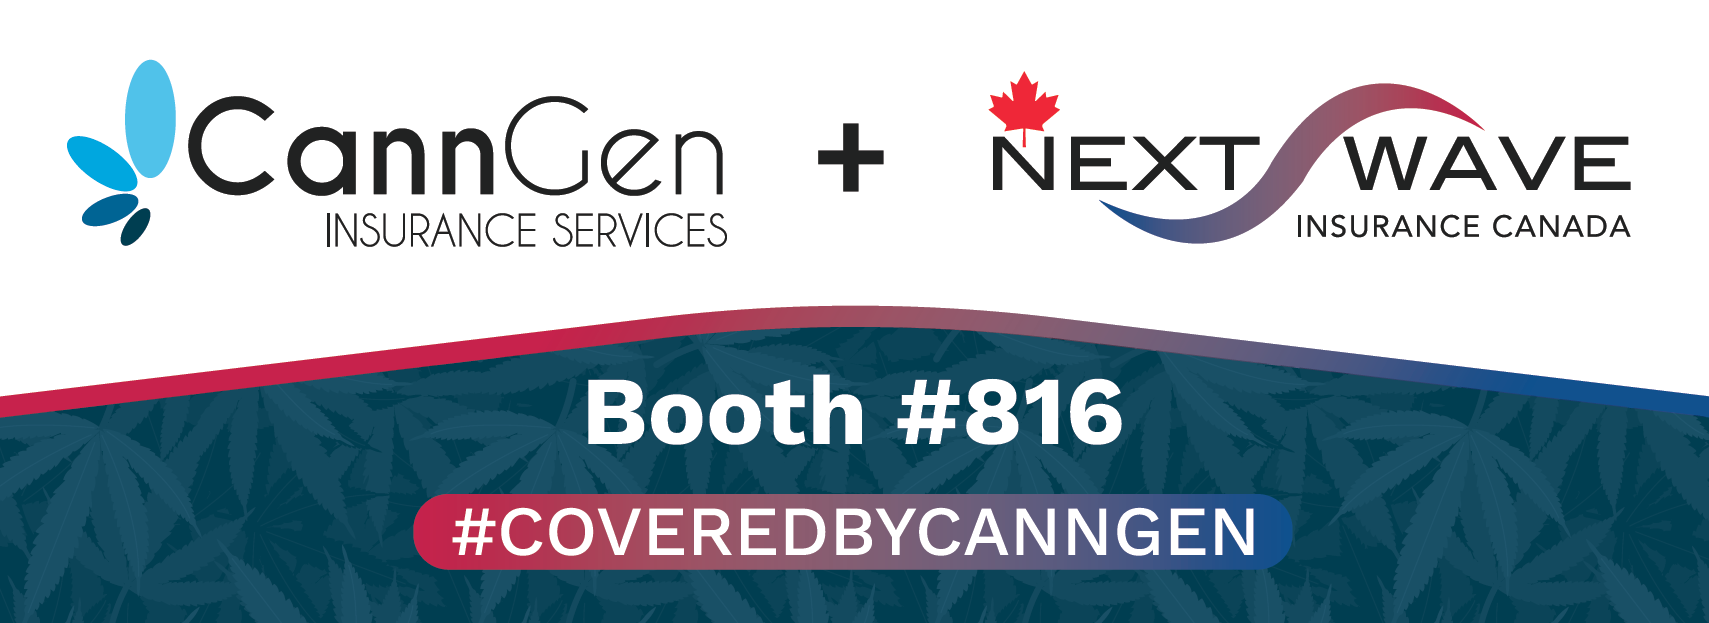 CannGen and NextWave are sponsors for the MJBizCon Booth #816 #CoveredByCanngen